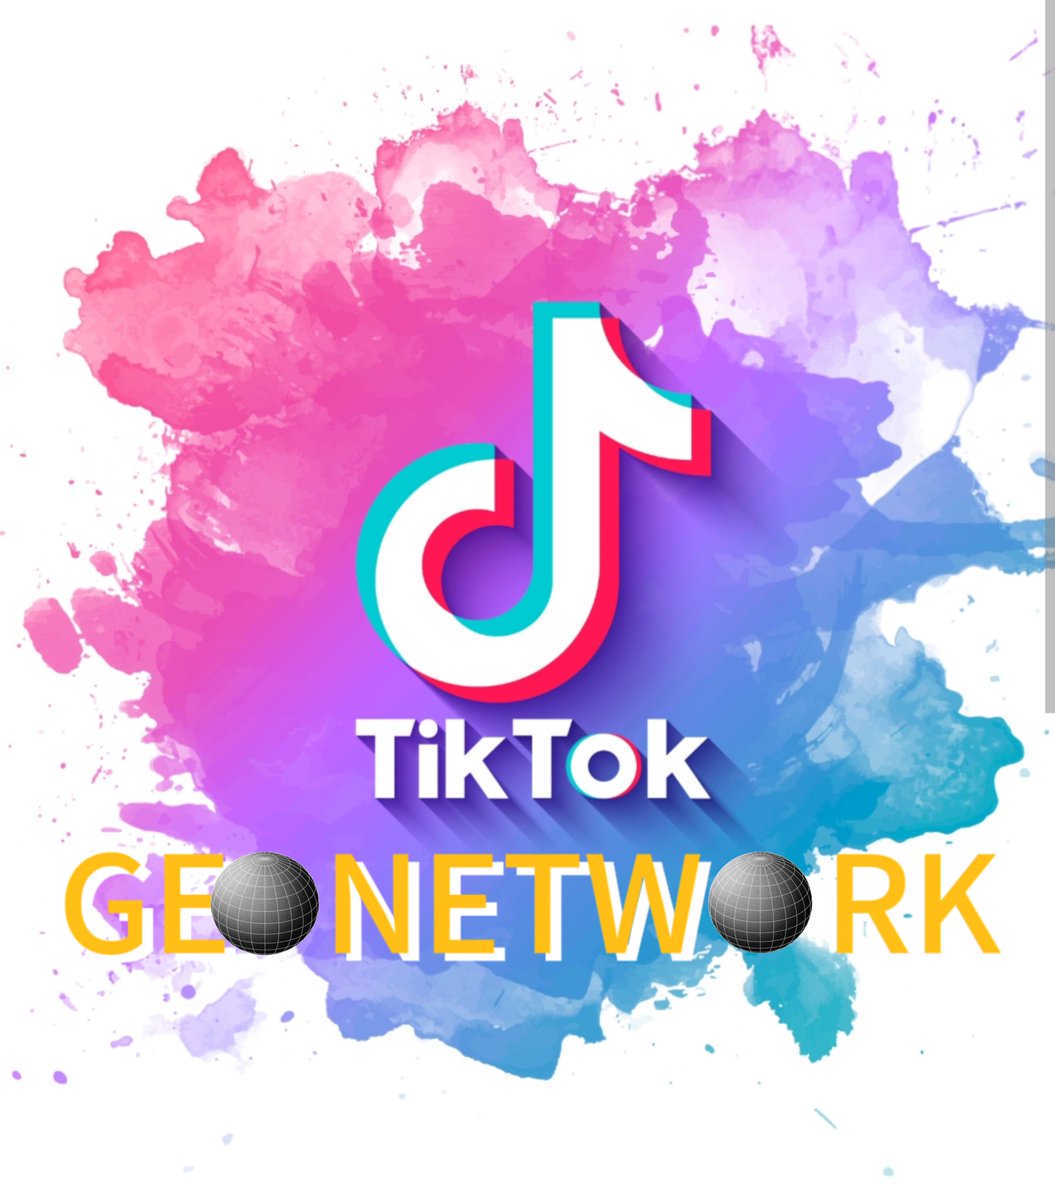 📢Our tik tok account is ready. We will be glad♥️ to see you there too. tiktok.com/@geonetwork100…